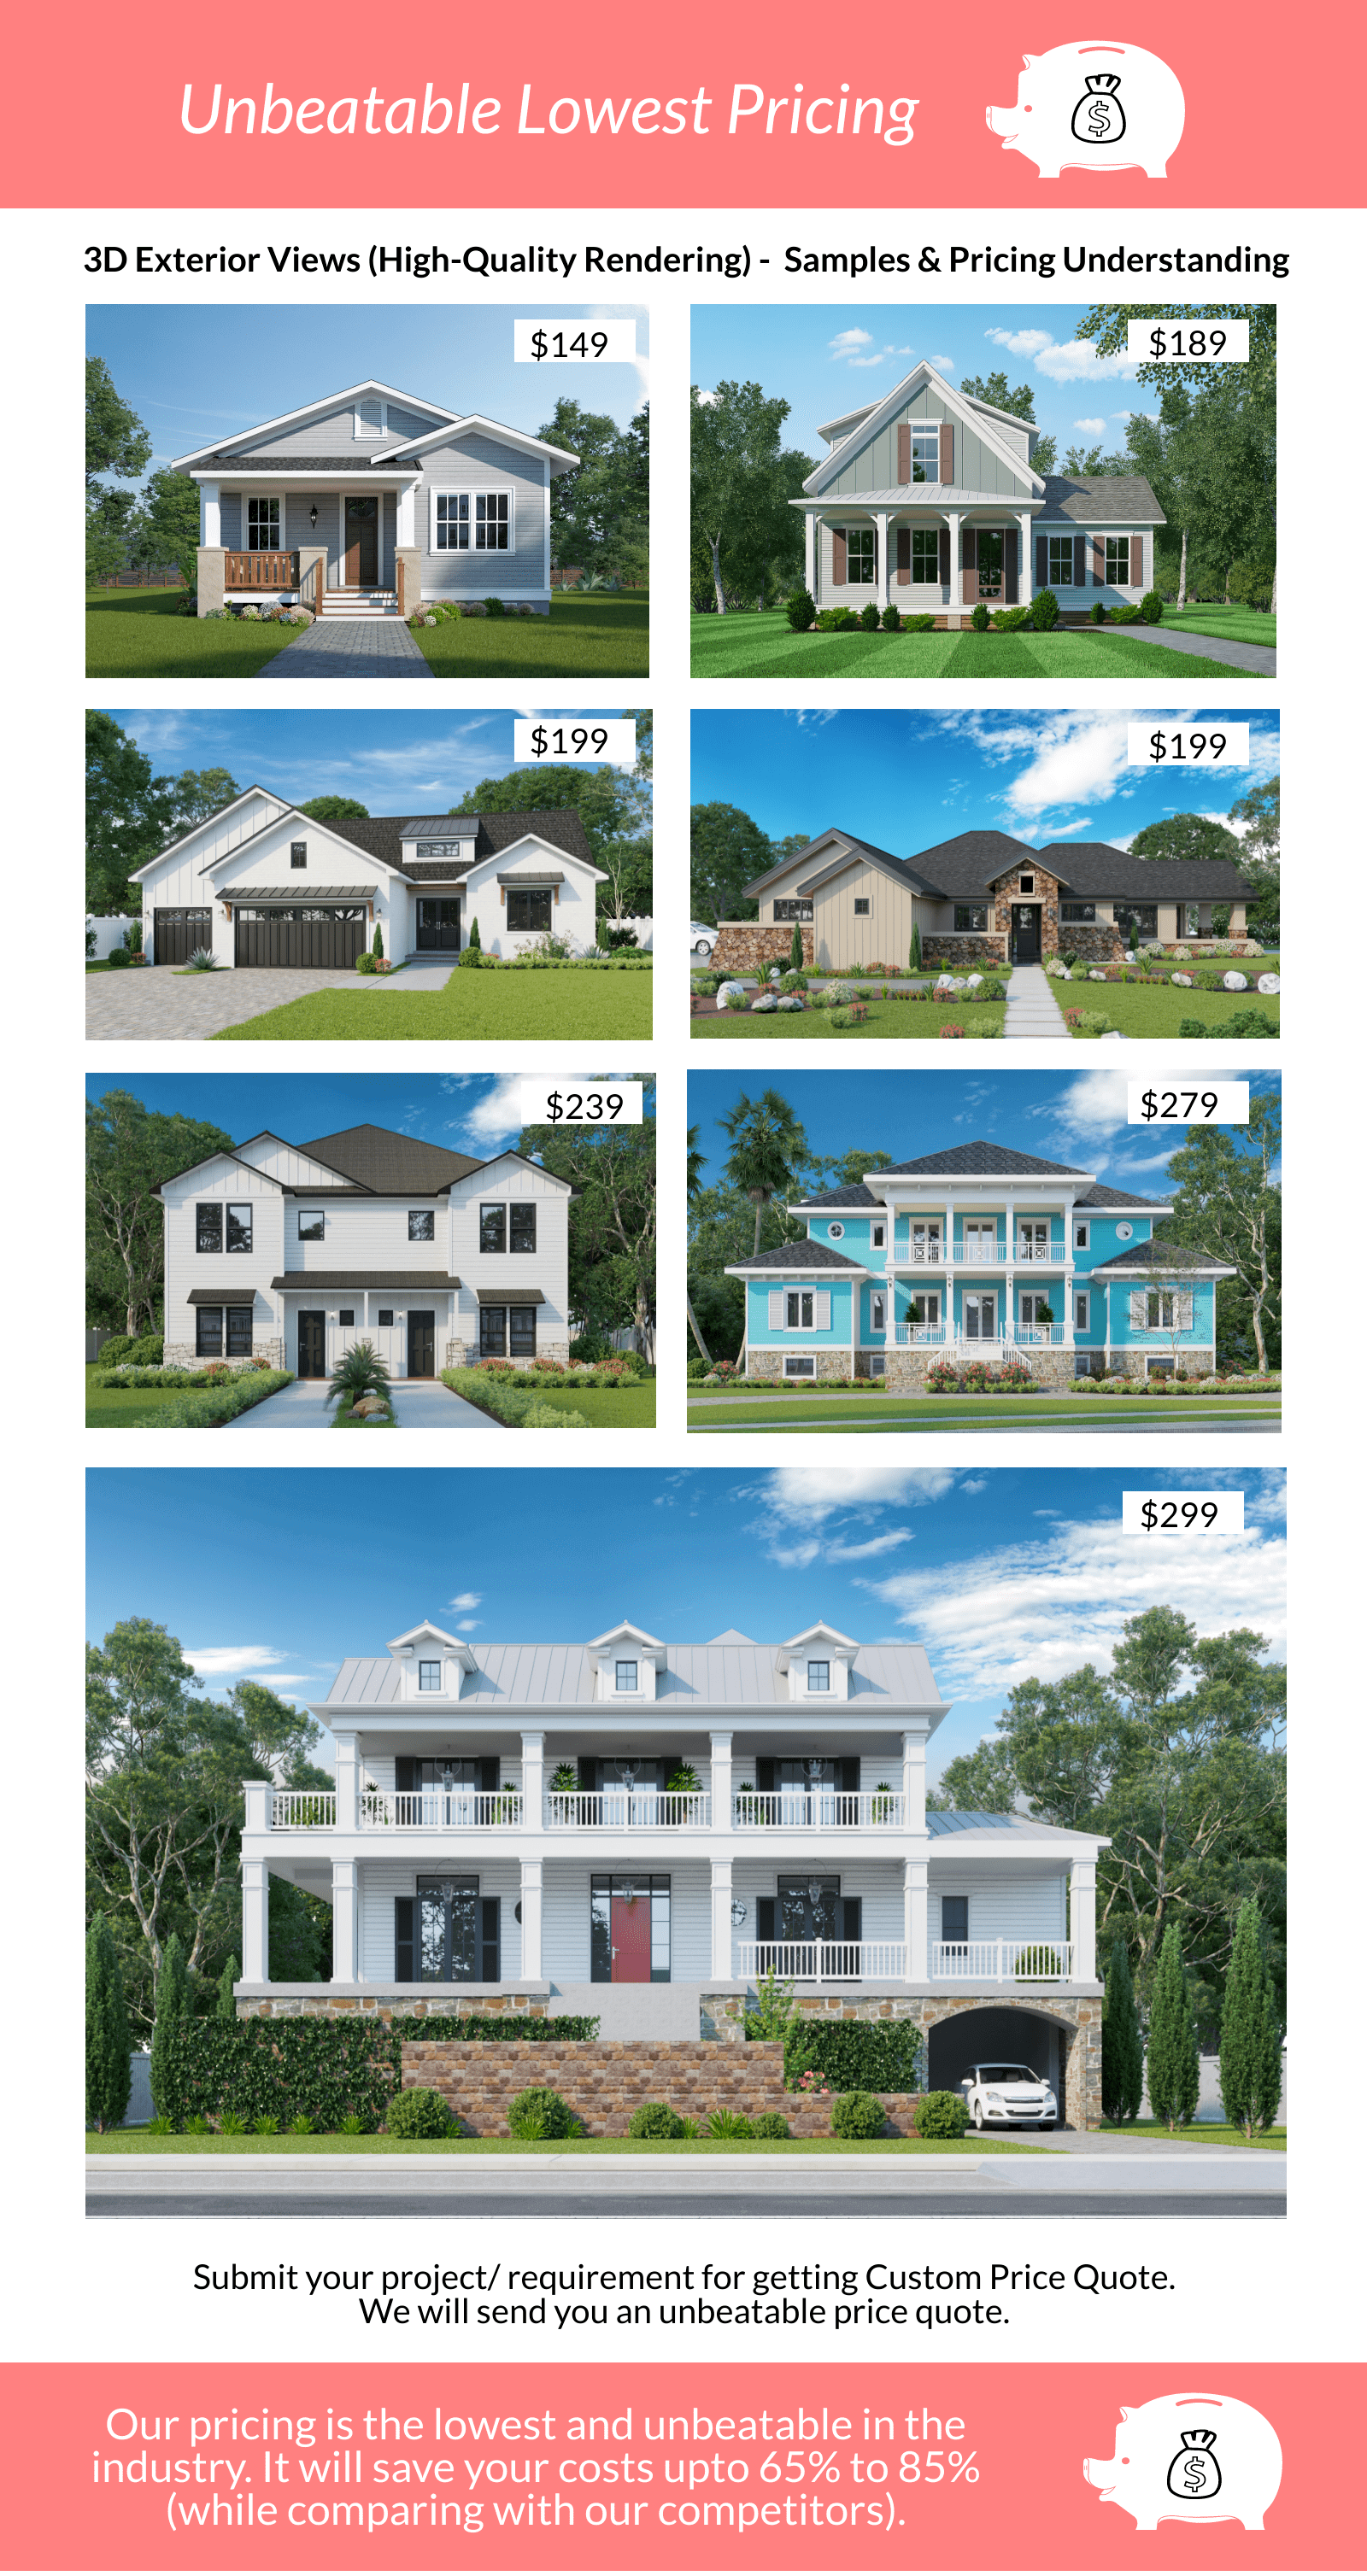 3D Exterior Real Estate Rendering Services Price Cost